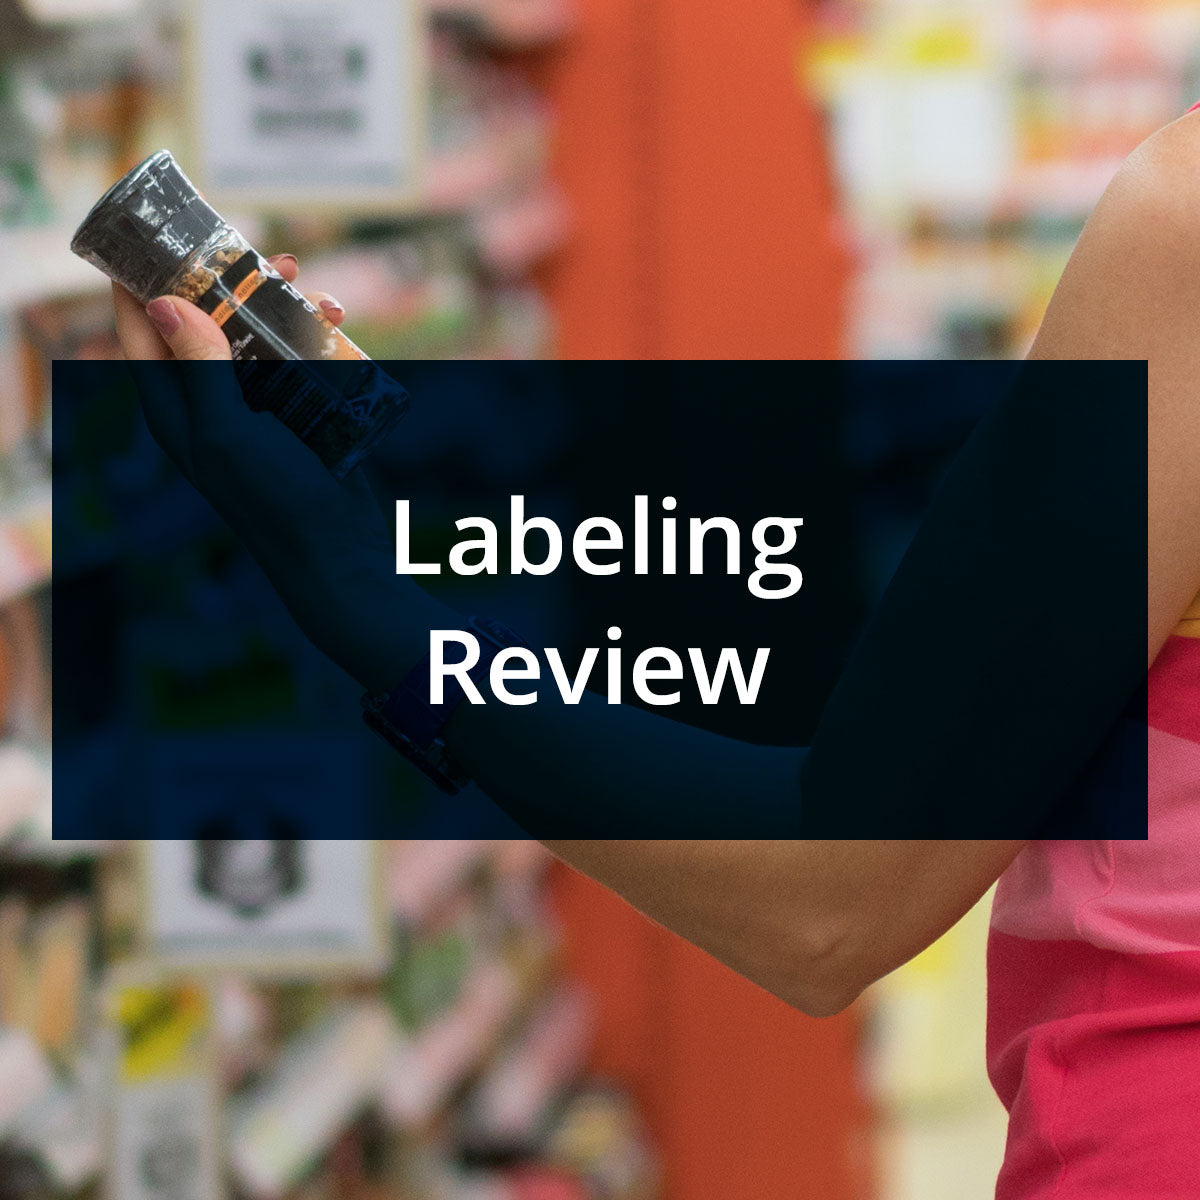 Labeling Review